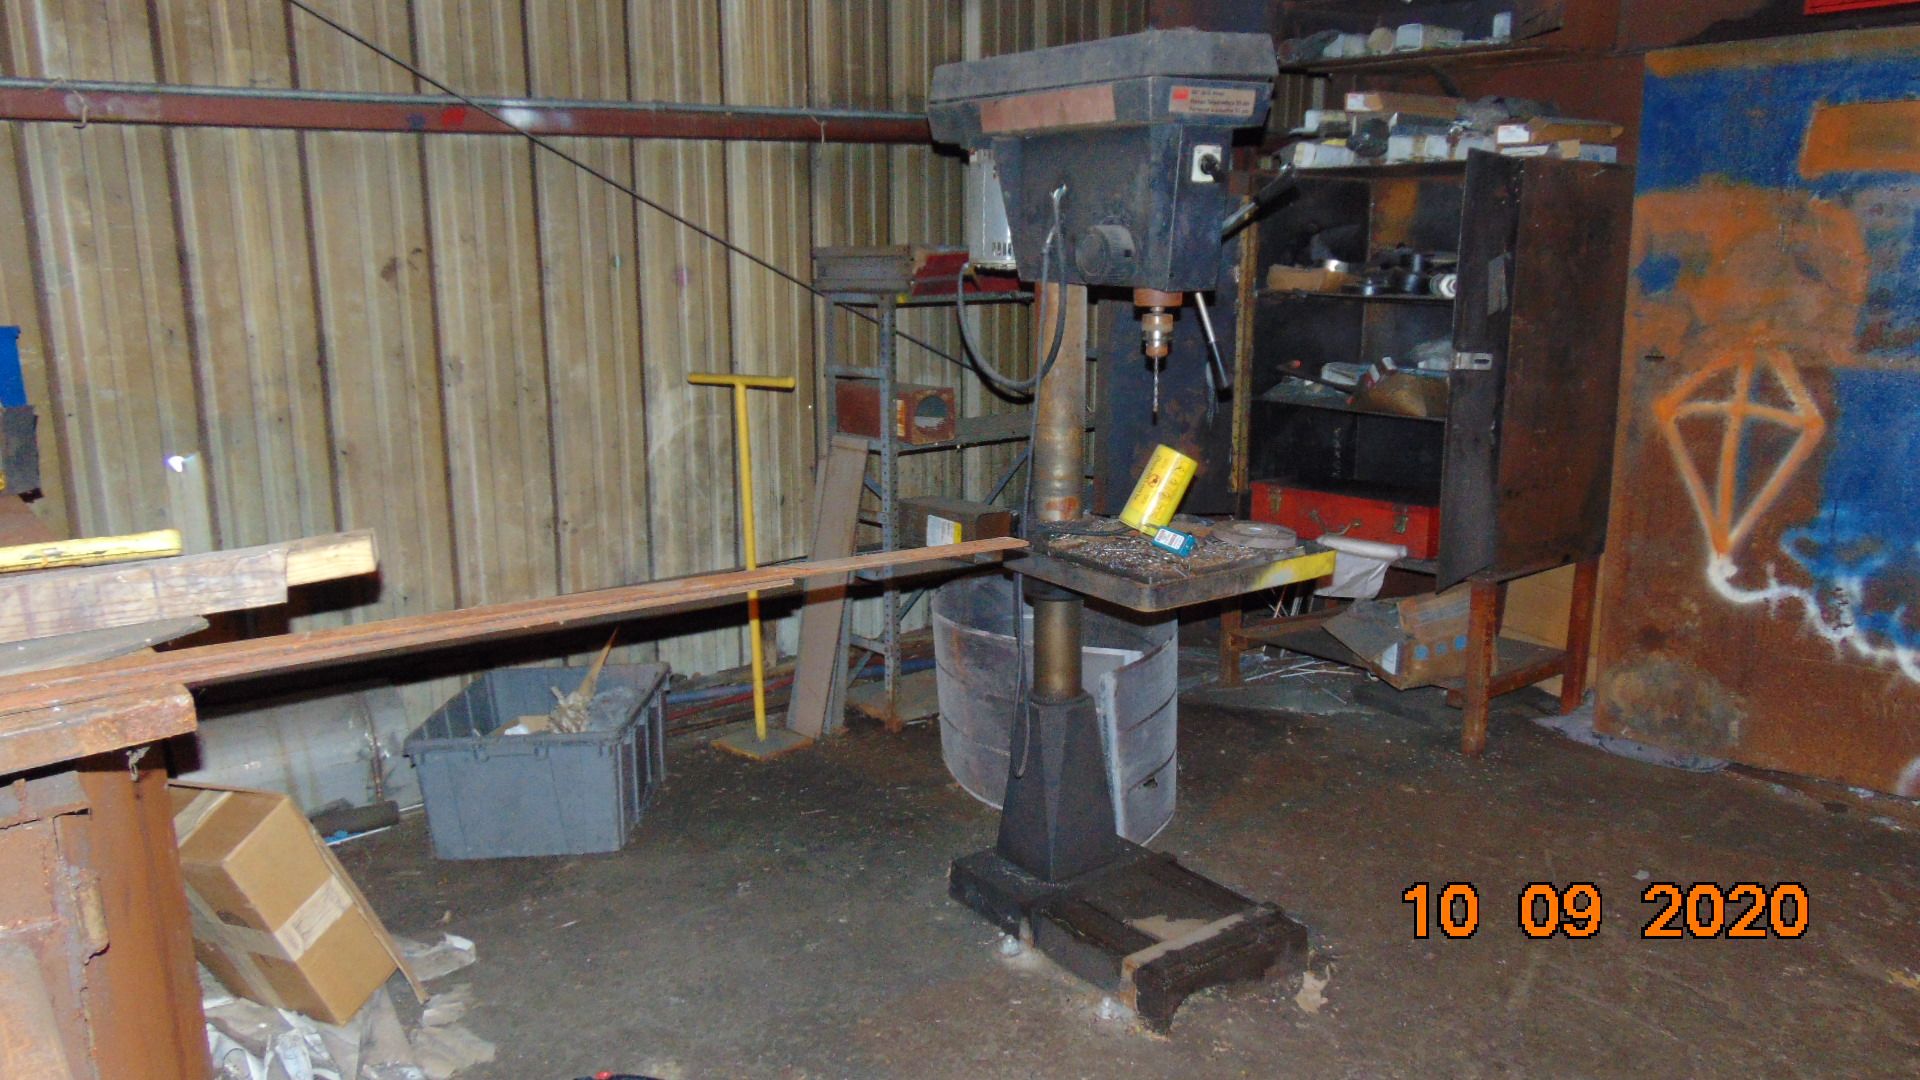 Contents in Trailer Repair Building and Attached Rear Building - Image 12 of 16